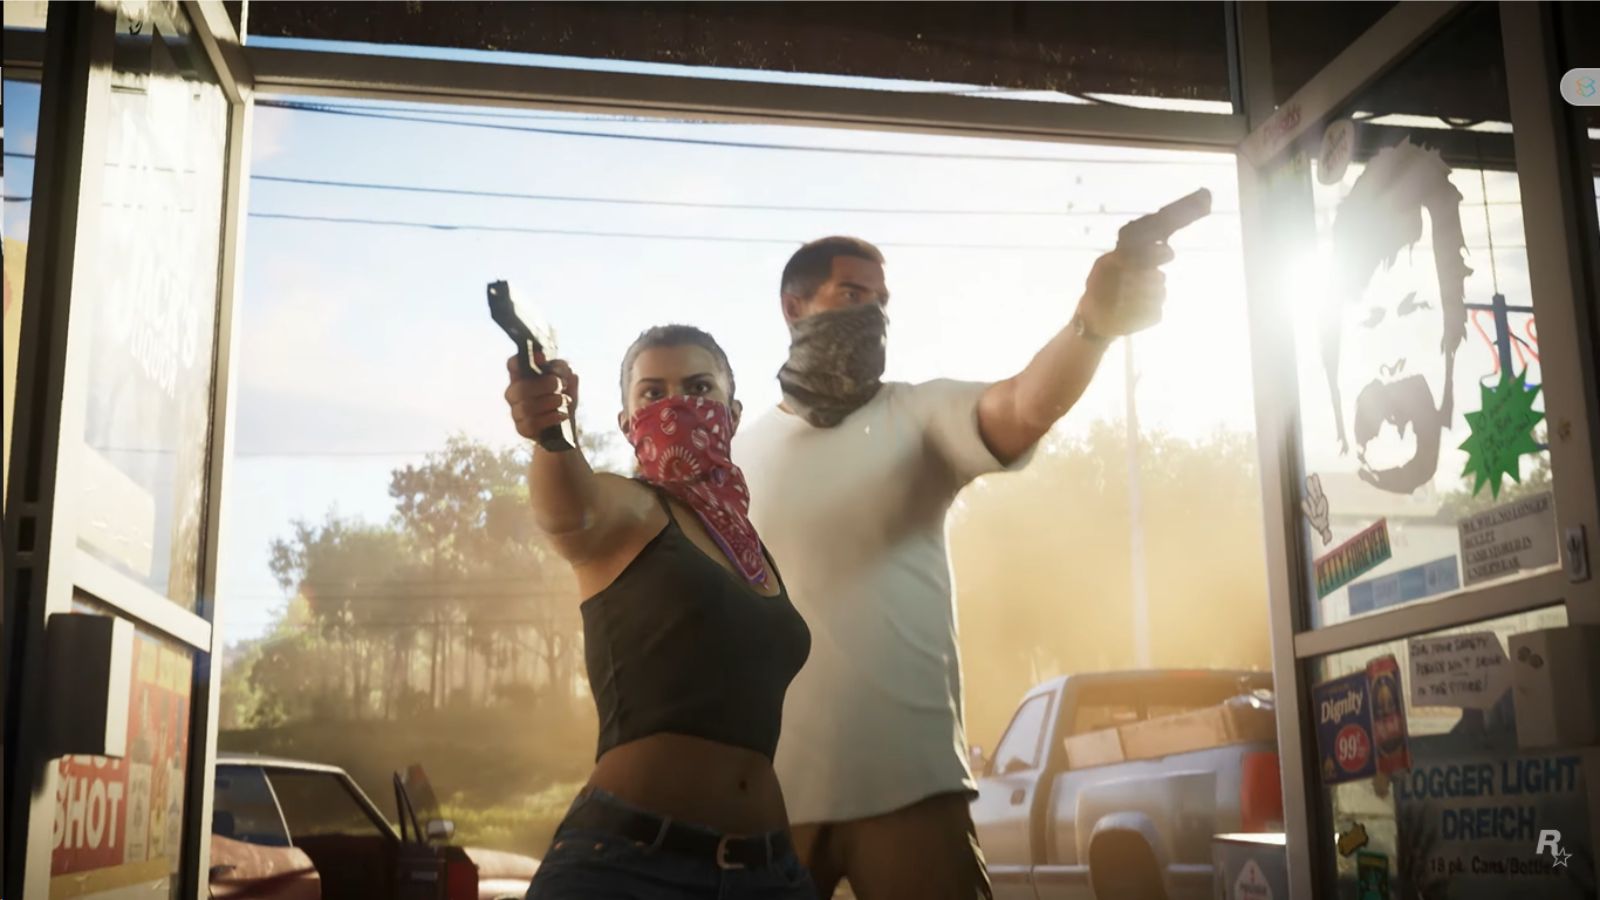 GTA VI from Rockstar Games: Trailer, characters, plot and more details